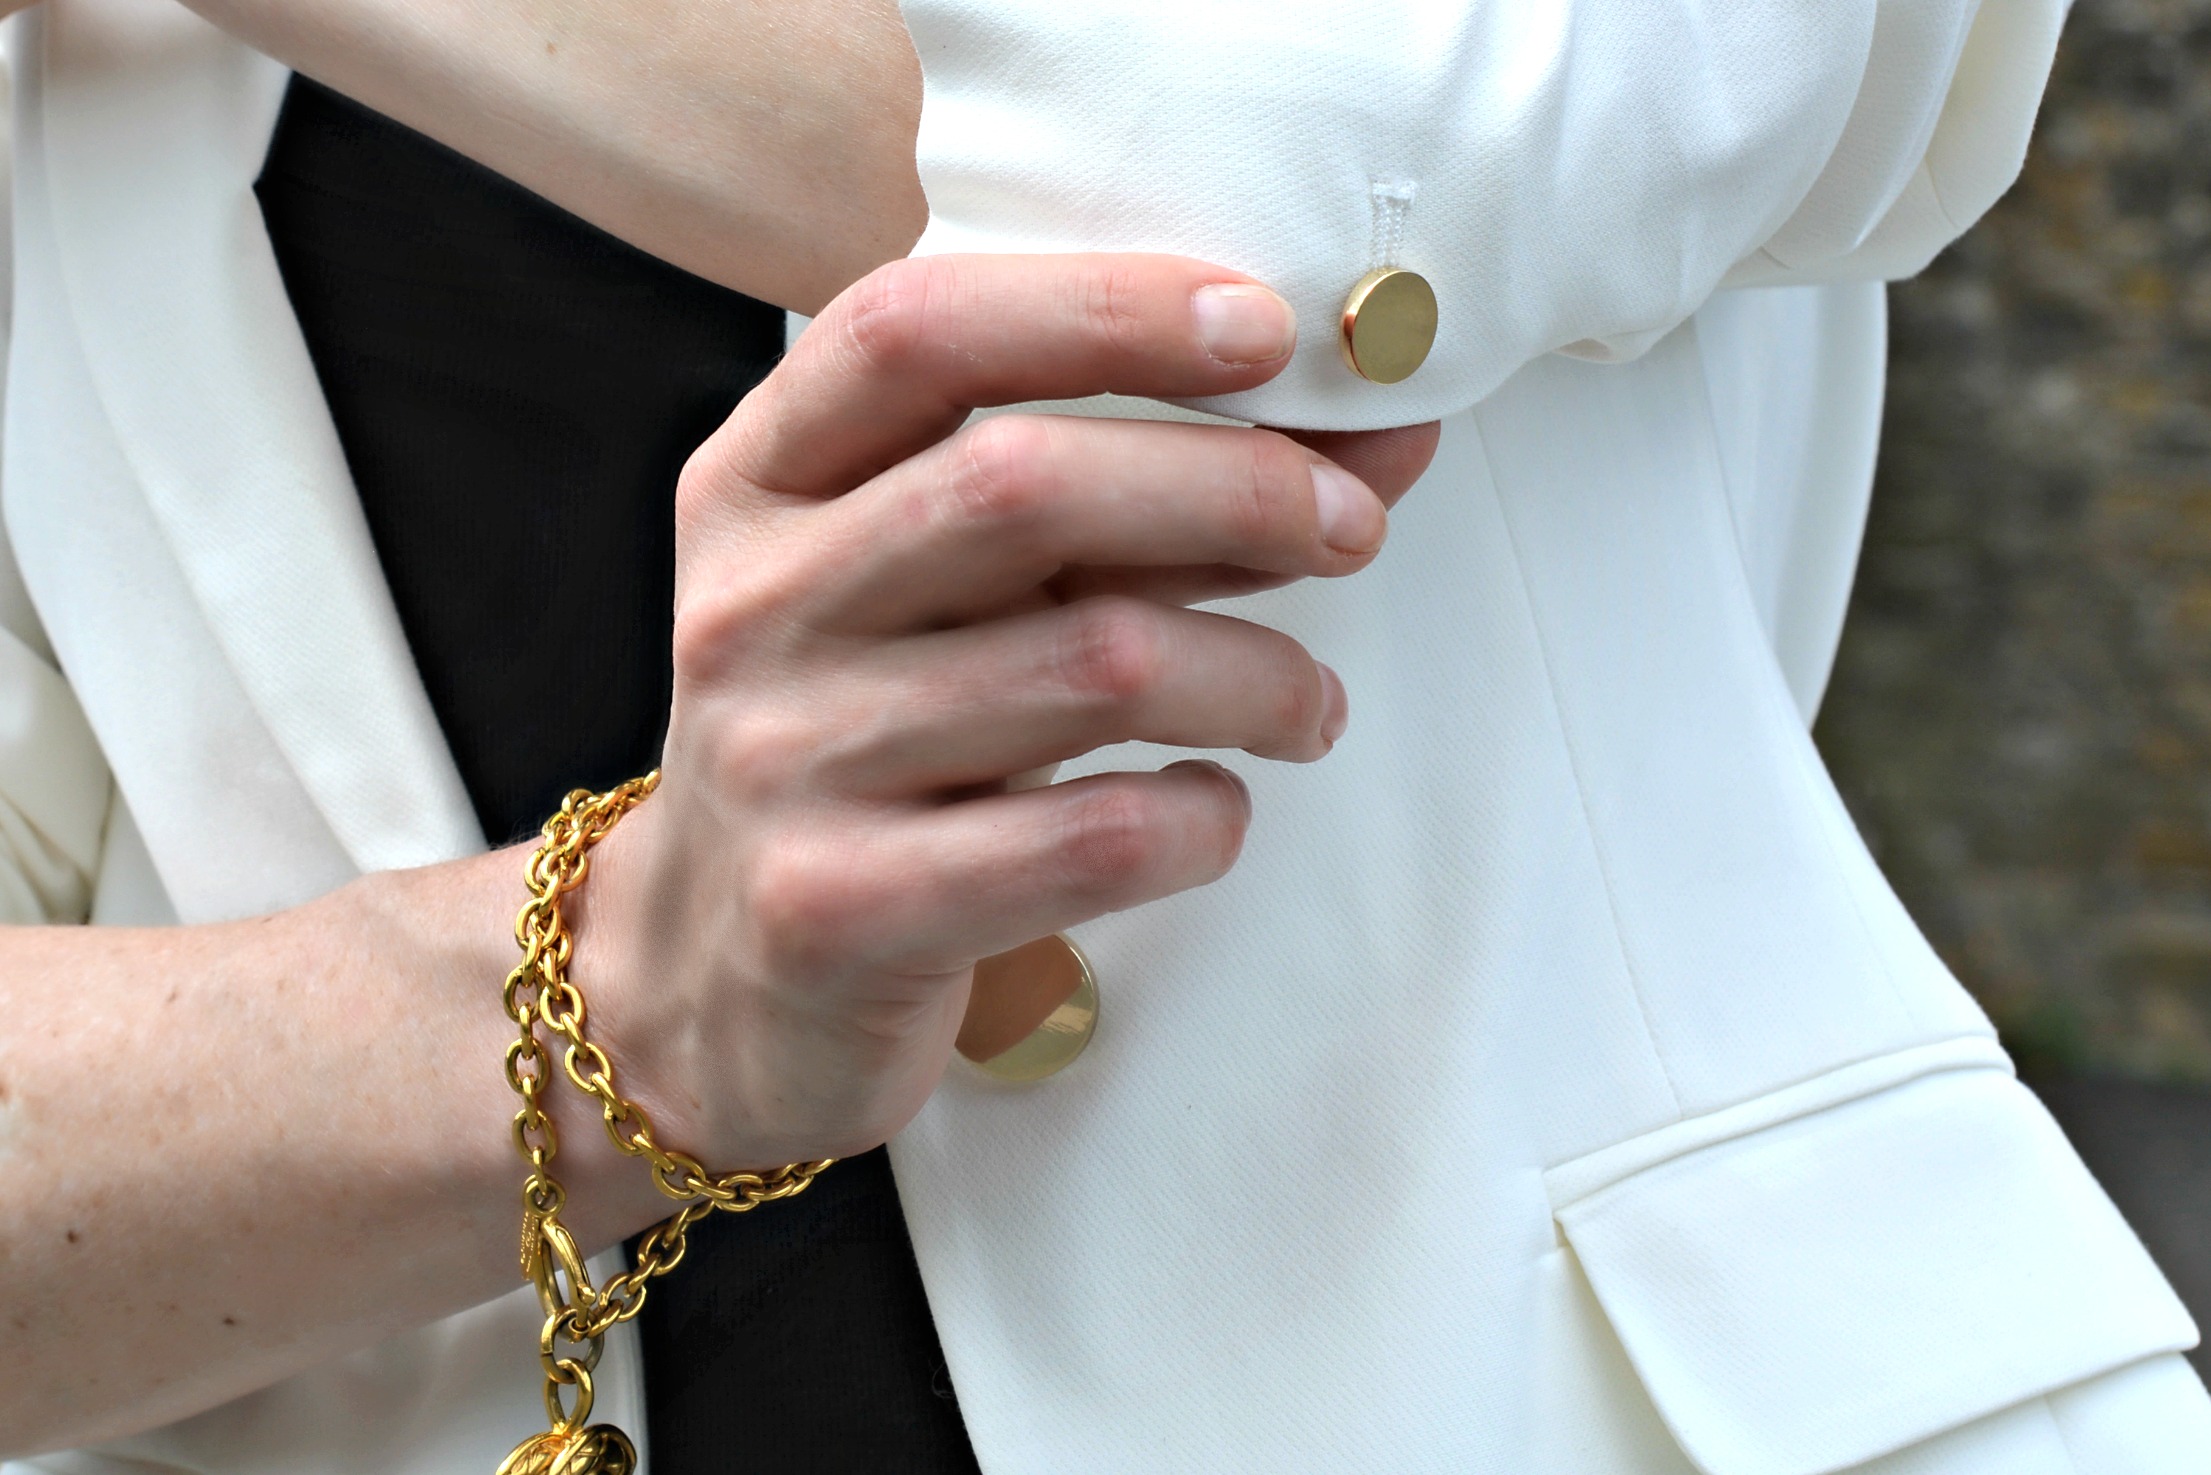 Marks and Spencer White Blazer gold button detail - White top Style Challenge Fashion over 40 | Chanel Vintage CC choker worn as a bracelet - Clever Fashion over 40 - RetroChicMama